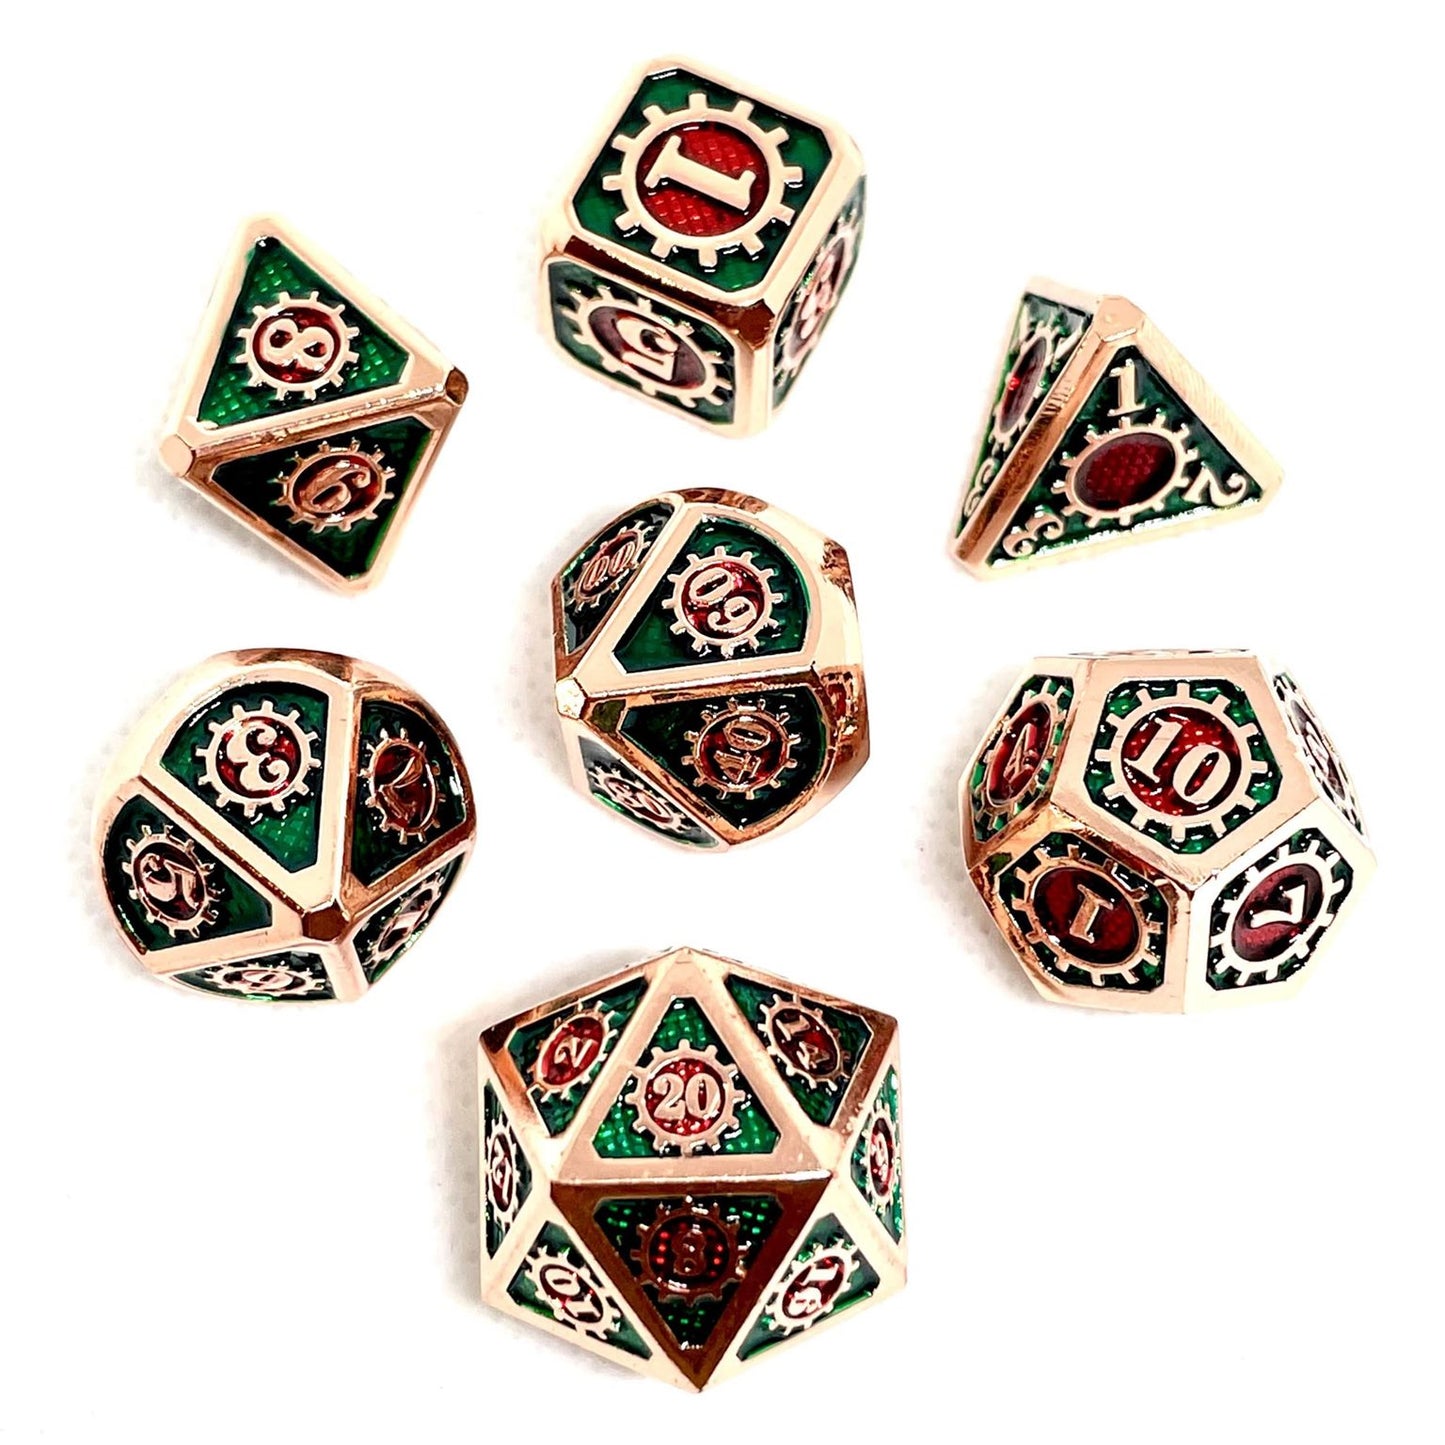 Rug of Smothering metal dnd dice set of 7 green and red